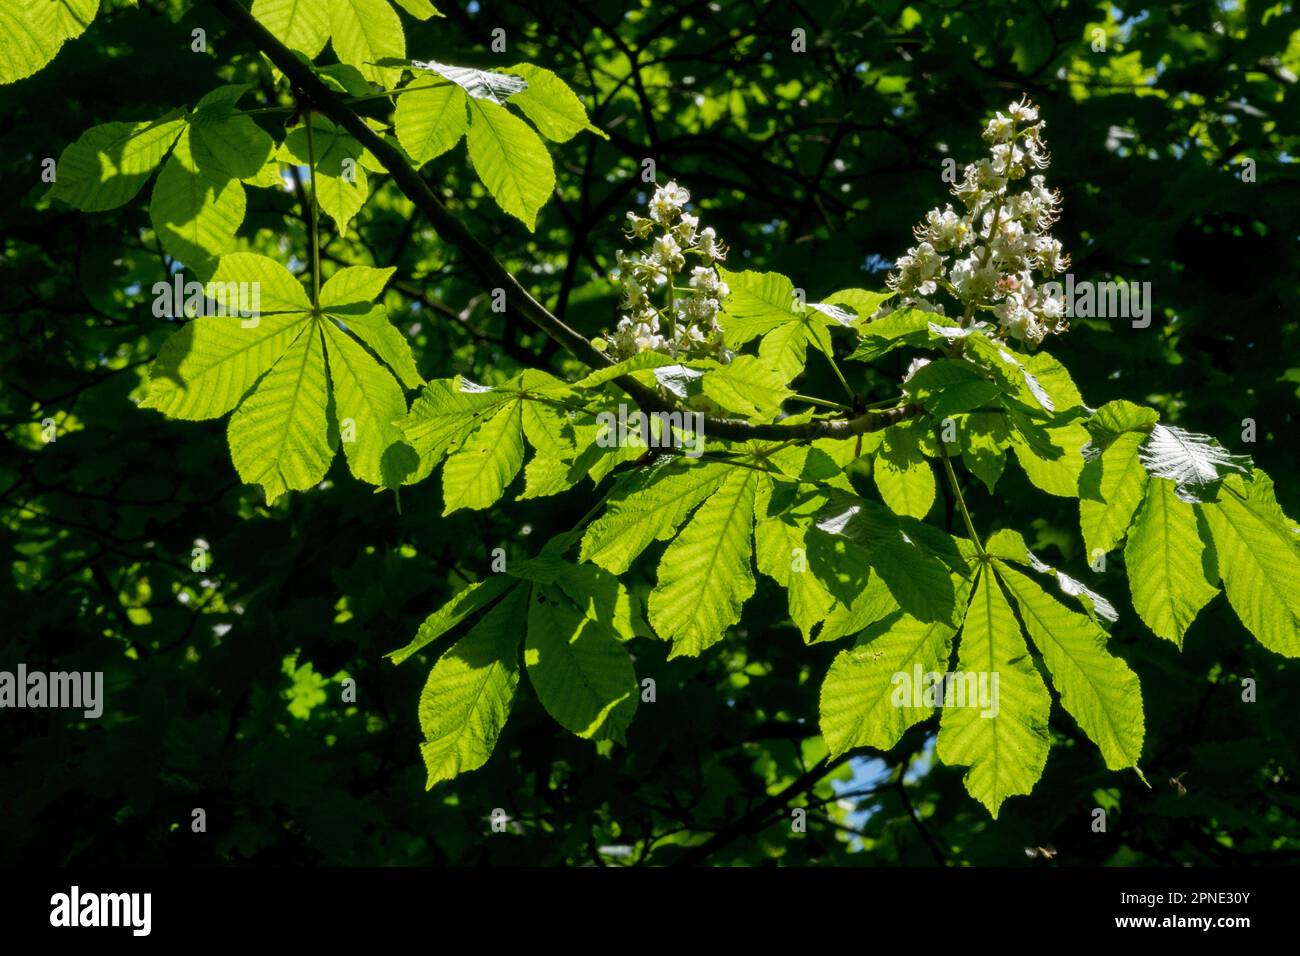 Spring, Green, Leaves, Horse chestnut, Branch, Backlight, Foliage, Young leaves, Sunlit, Aesculus hippocastanum Stock Photo